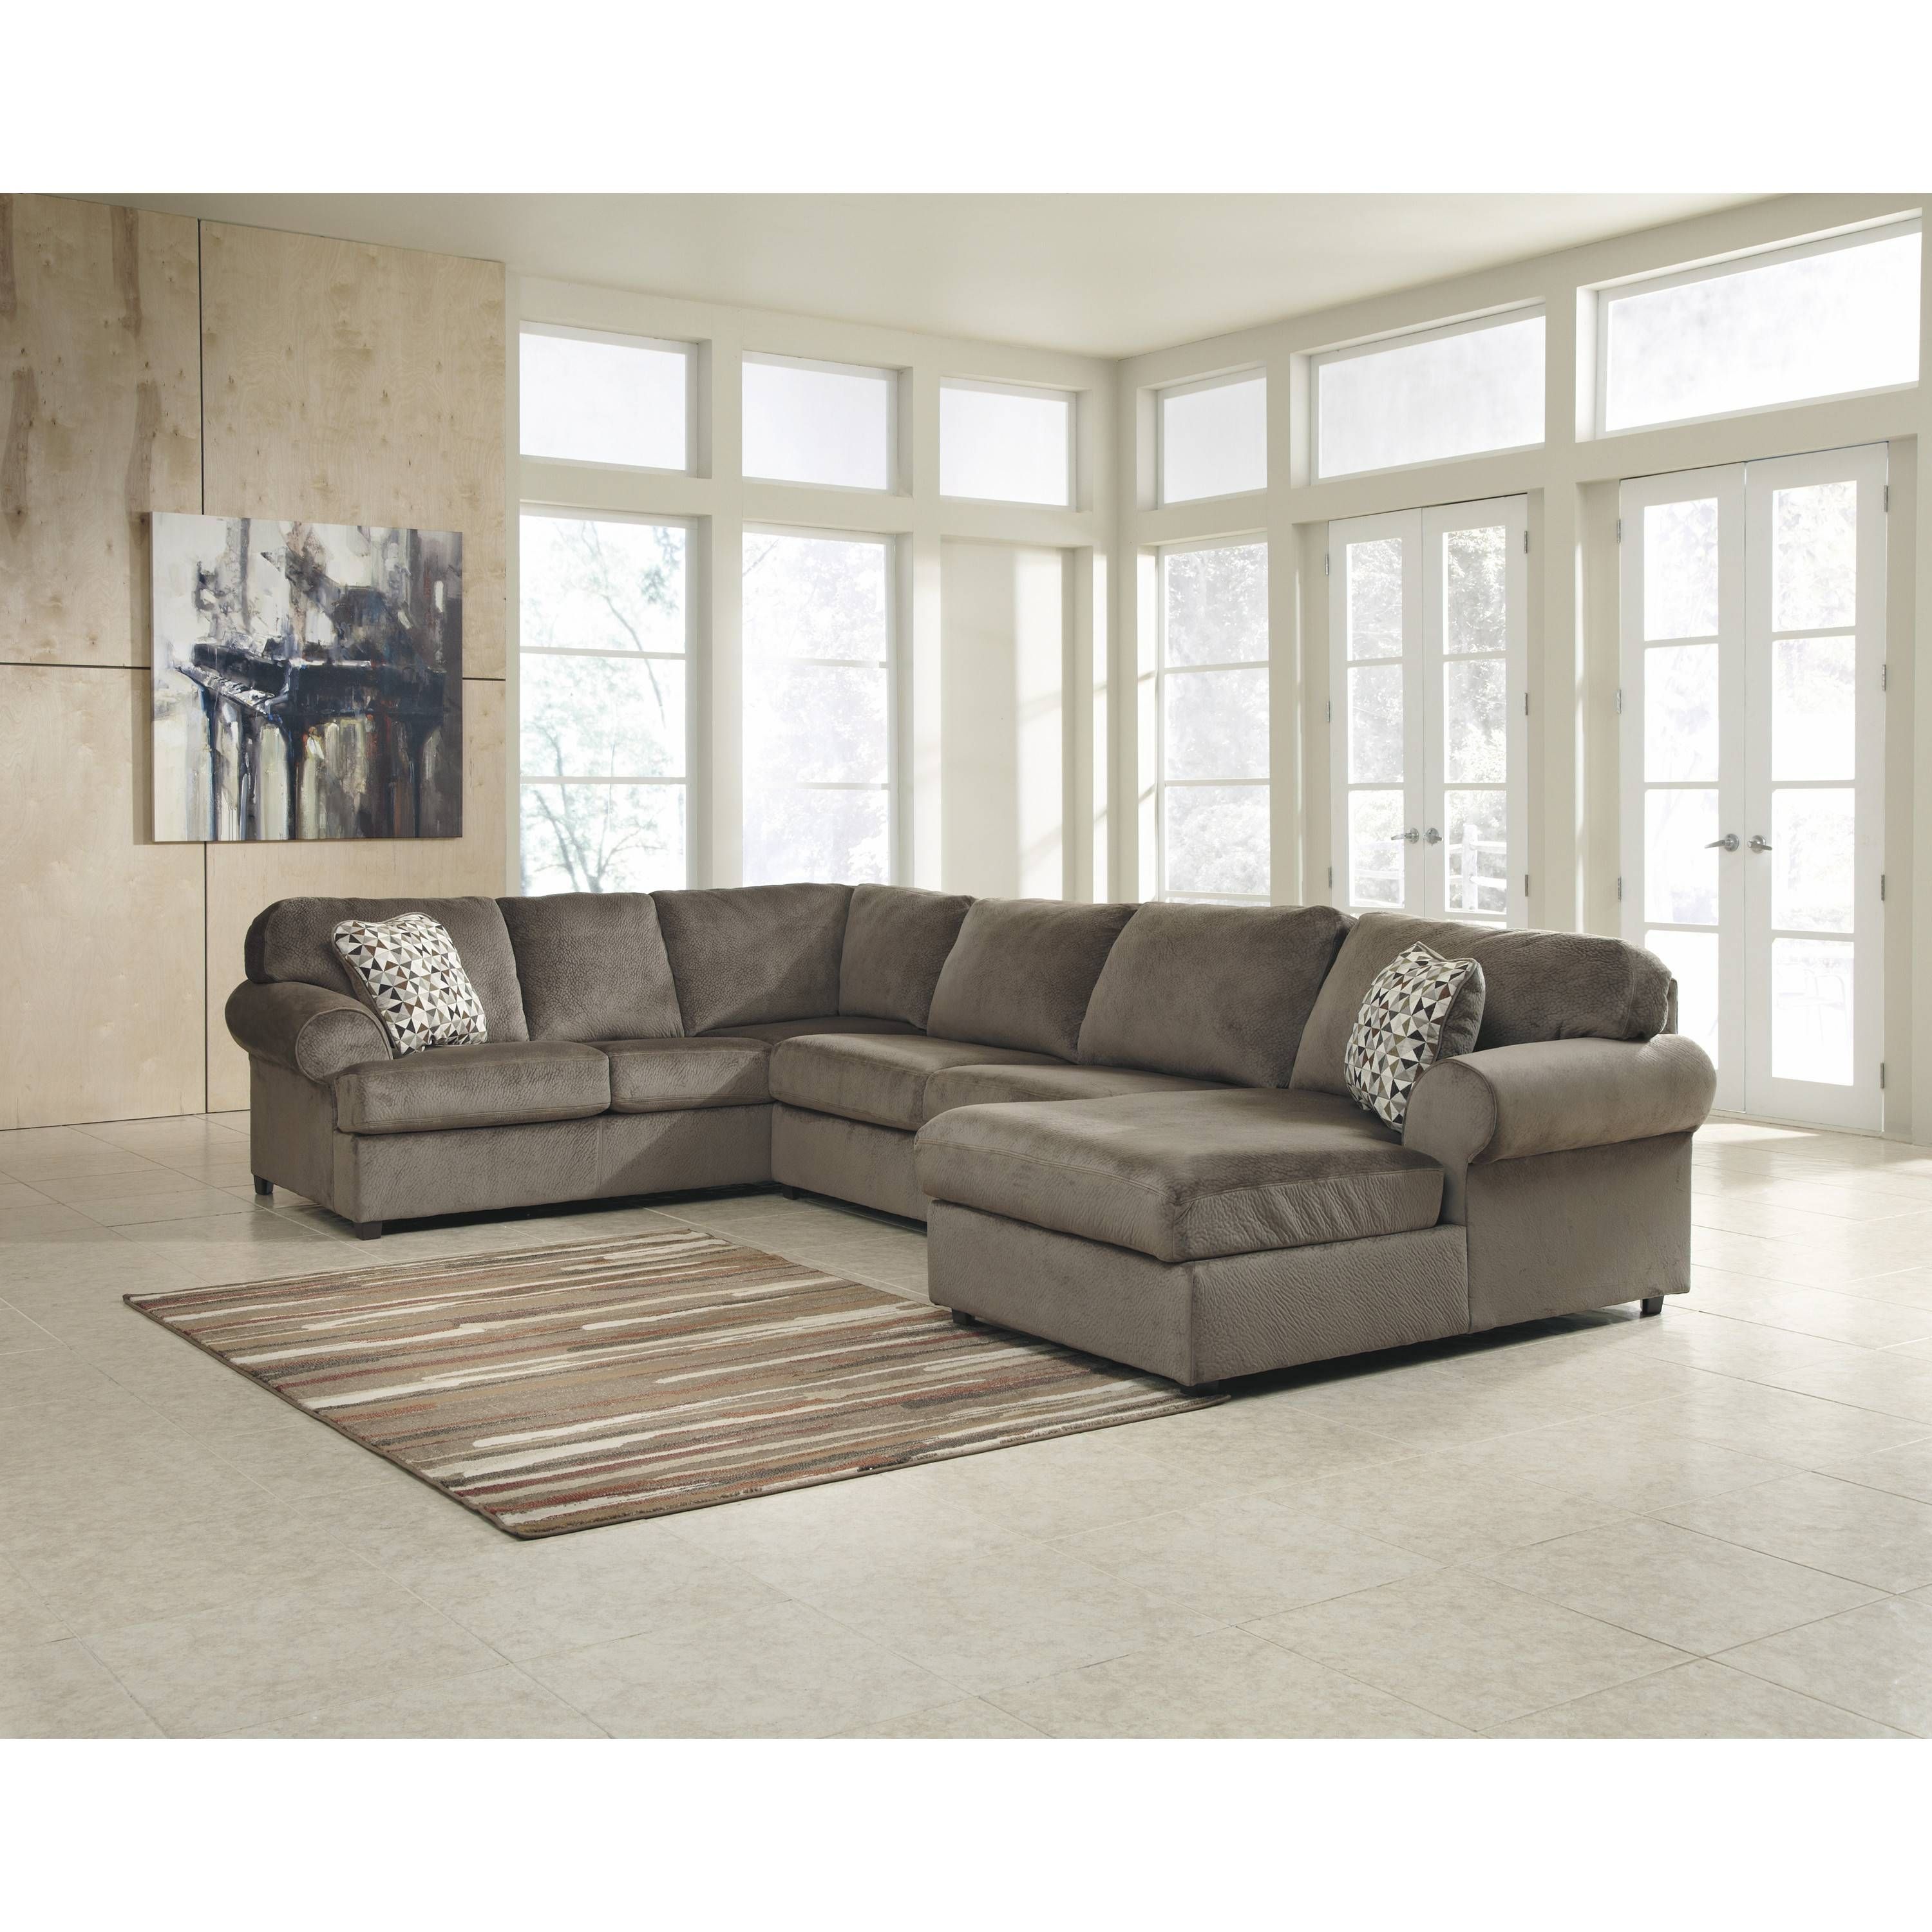 Popular C Shaped Sofa Sectional 36 For Your Build Your Own With C Shaped Sofa (View 26 of 30)